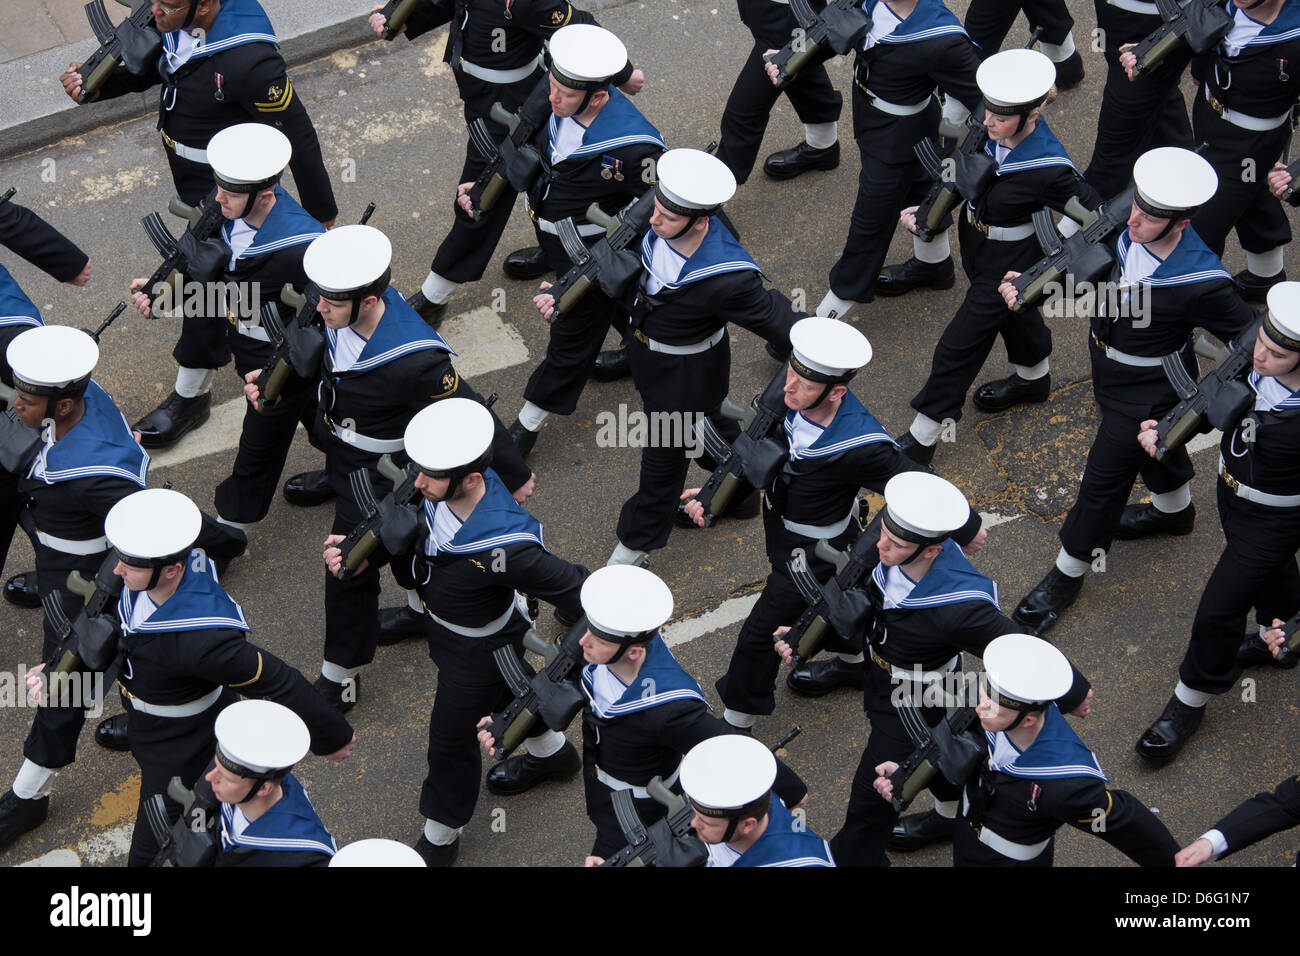 London, UK, 17 April 2013. The Royal Navy shows its respect at the funeral of Baroness Margaret Thatcher. Credit: Sarah Peters/Alamy Live News Stock Photo